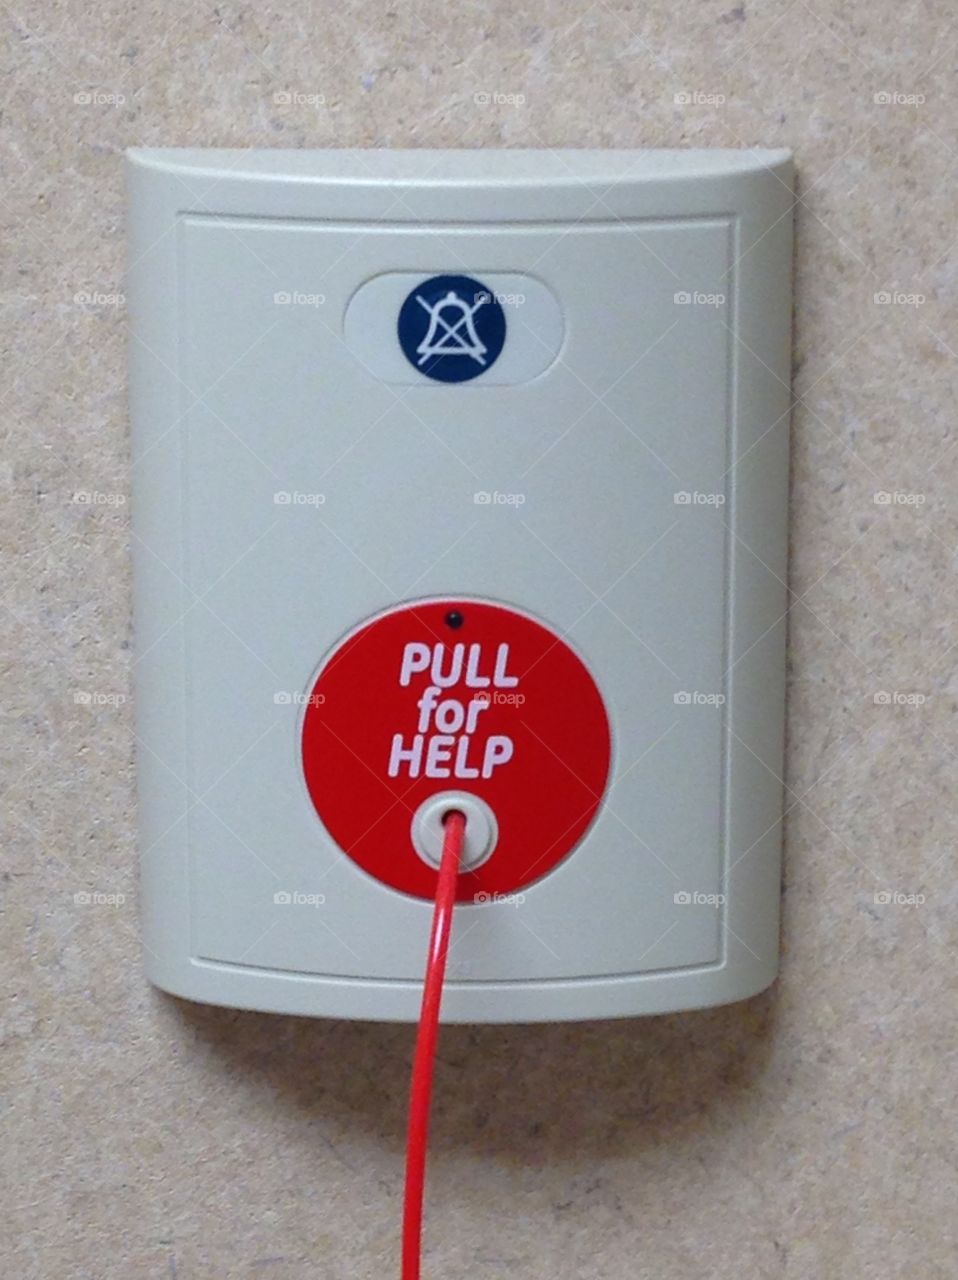 PULL FOR HELP alarm